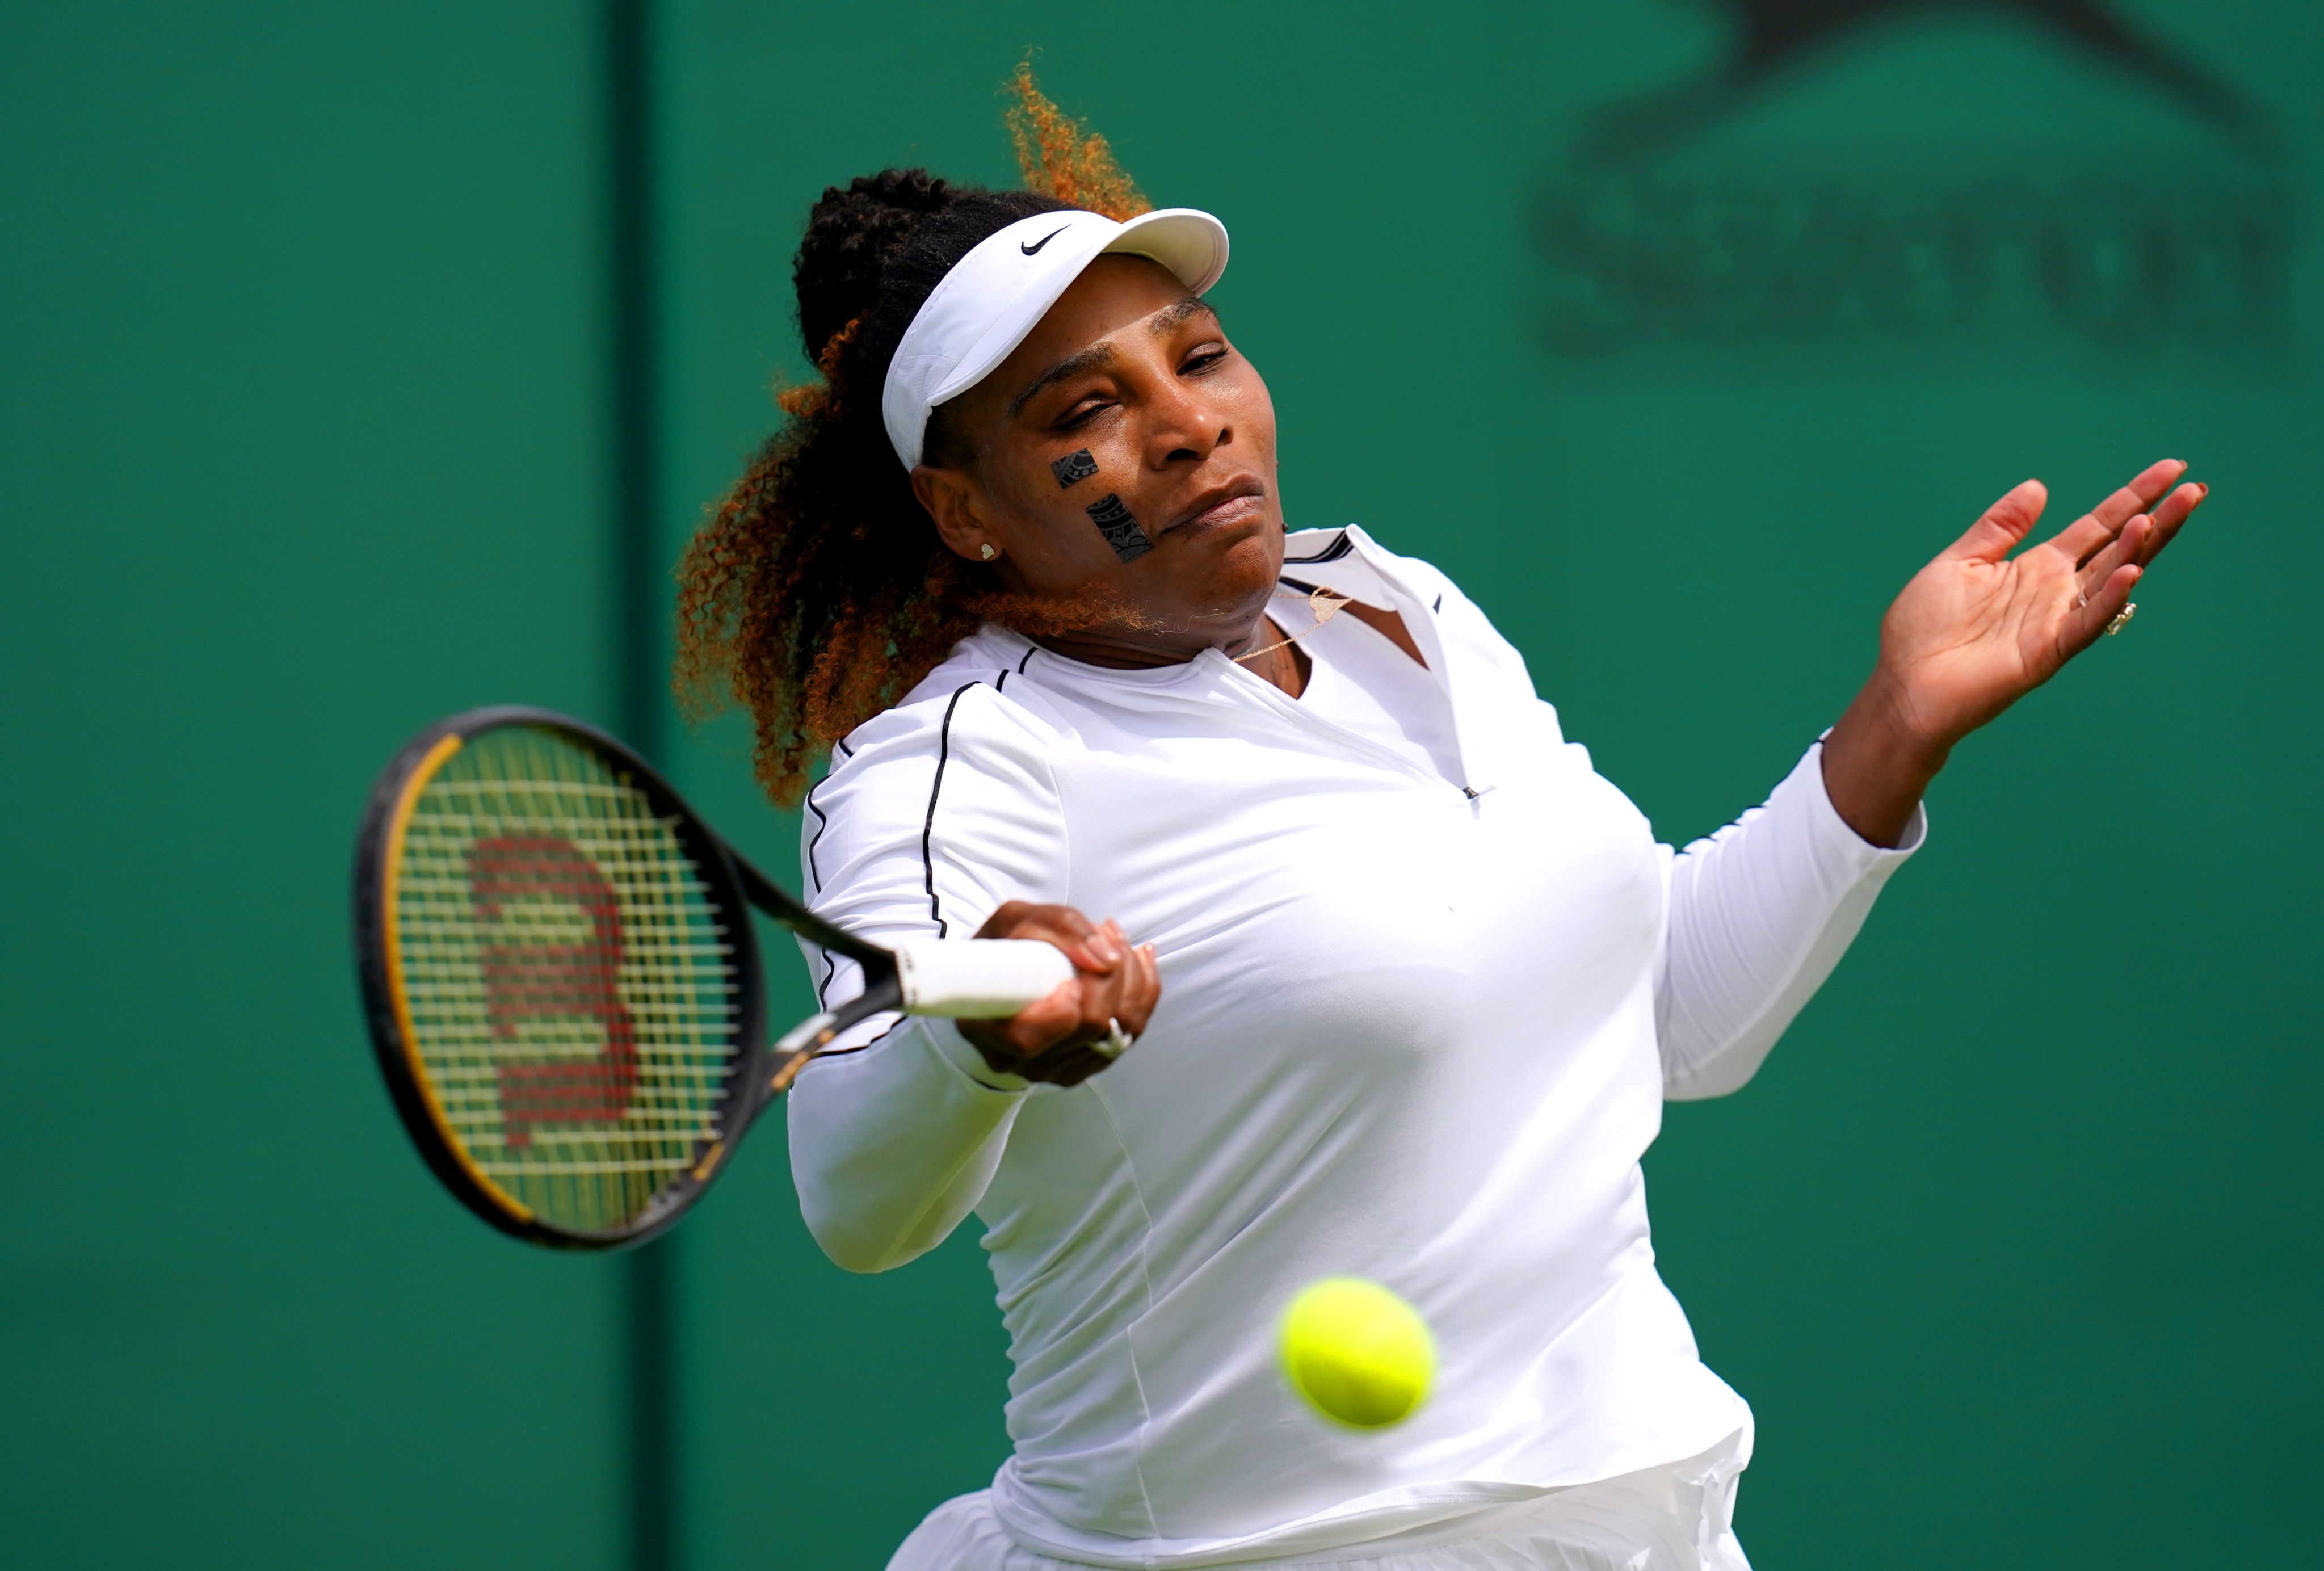 US tennis star Serena Williams plays a forehand during a practice session. Photo: dpa